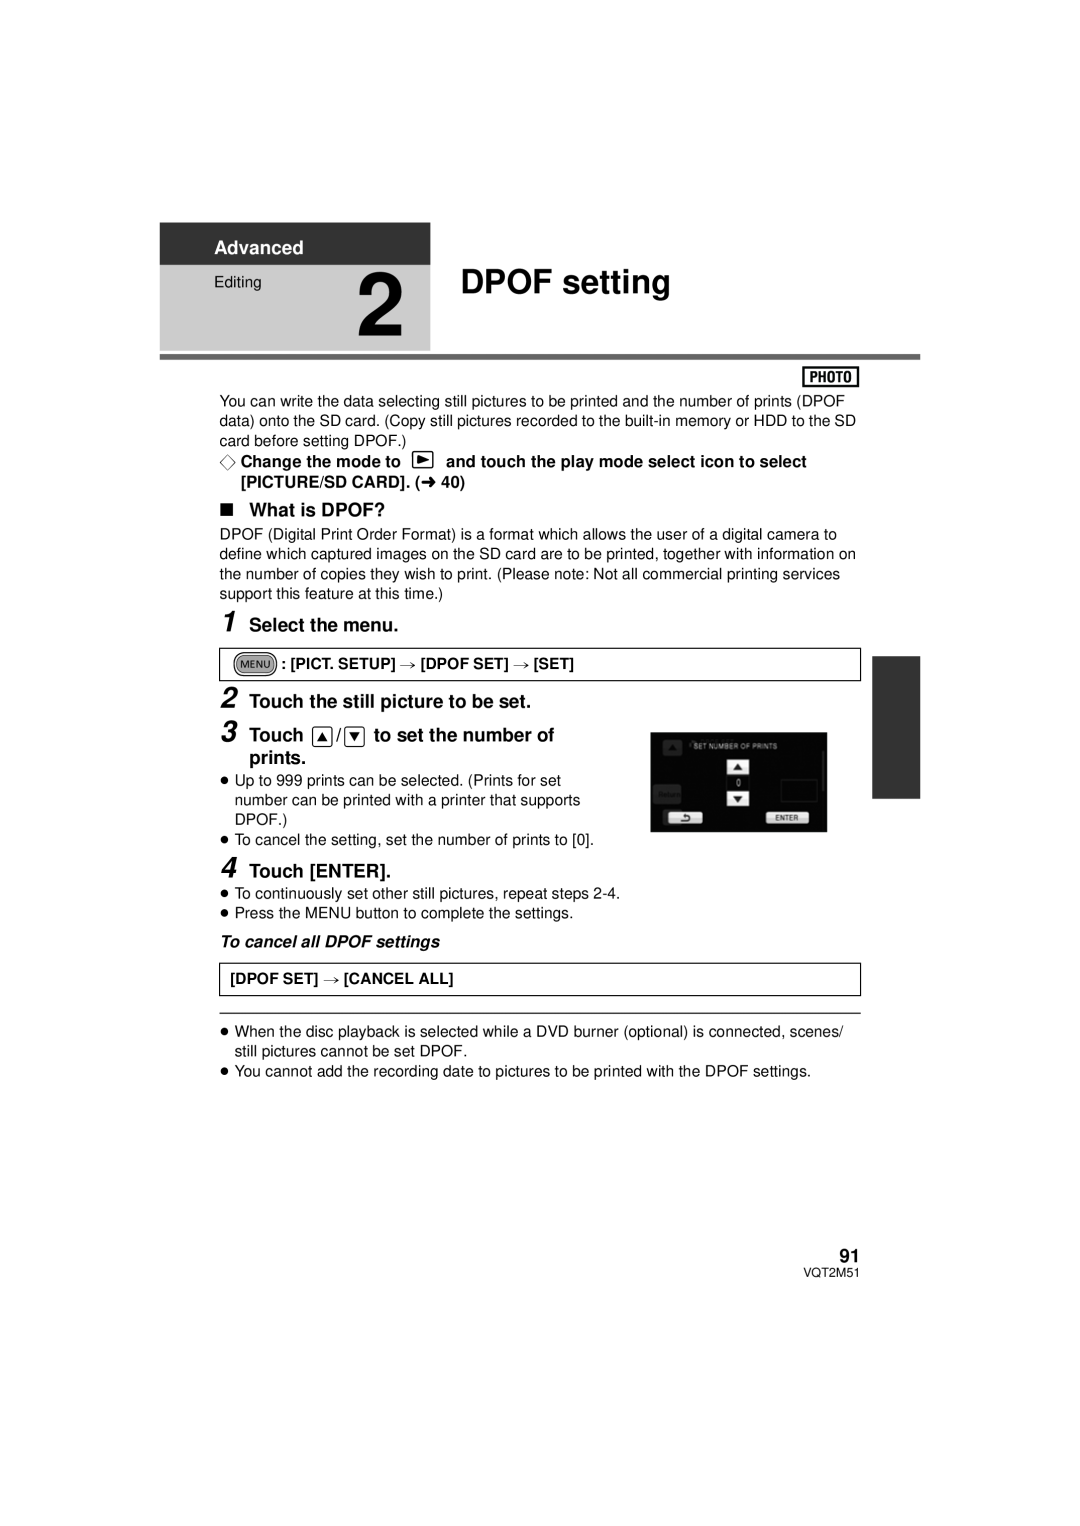 Panasonic HDC-HS60P/PC ∫ What is DPOF?, Touch the still picture to be set, To cancel all DPOF settings, Advanced 